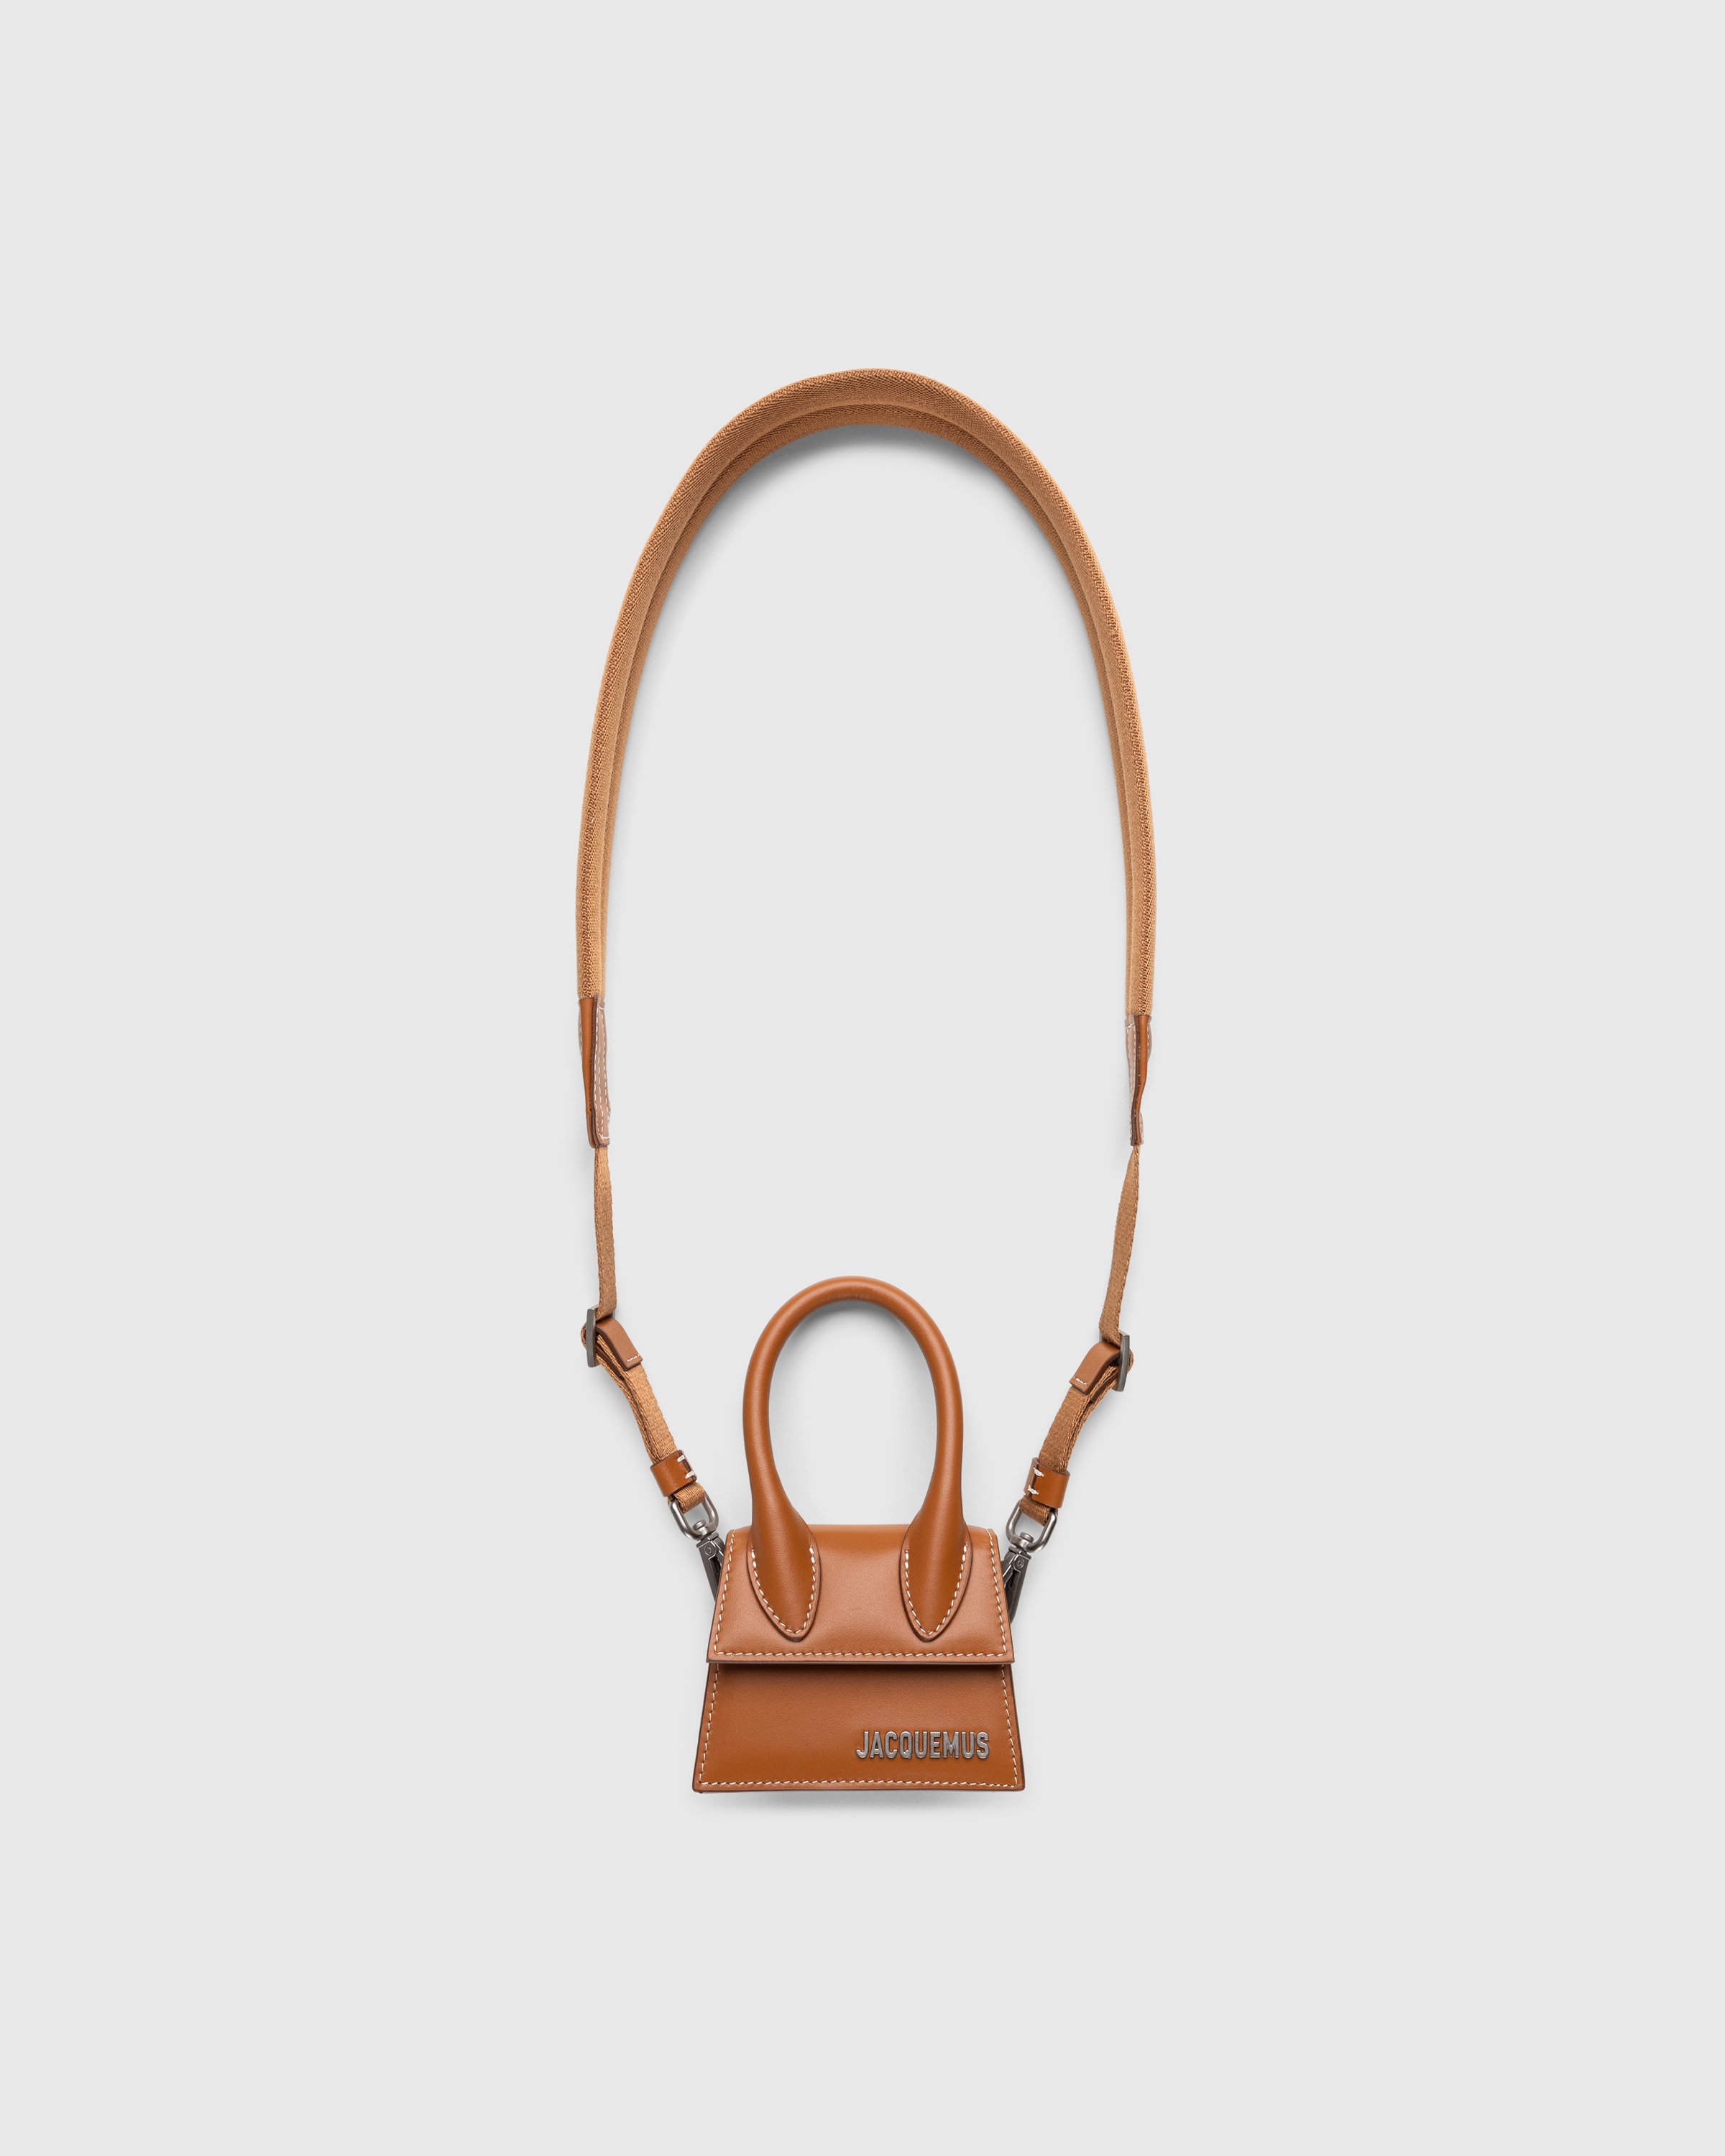 JACQUEMUS - LE CHIQUITO HOMME - Accessories - Brown - Image 2